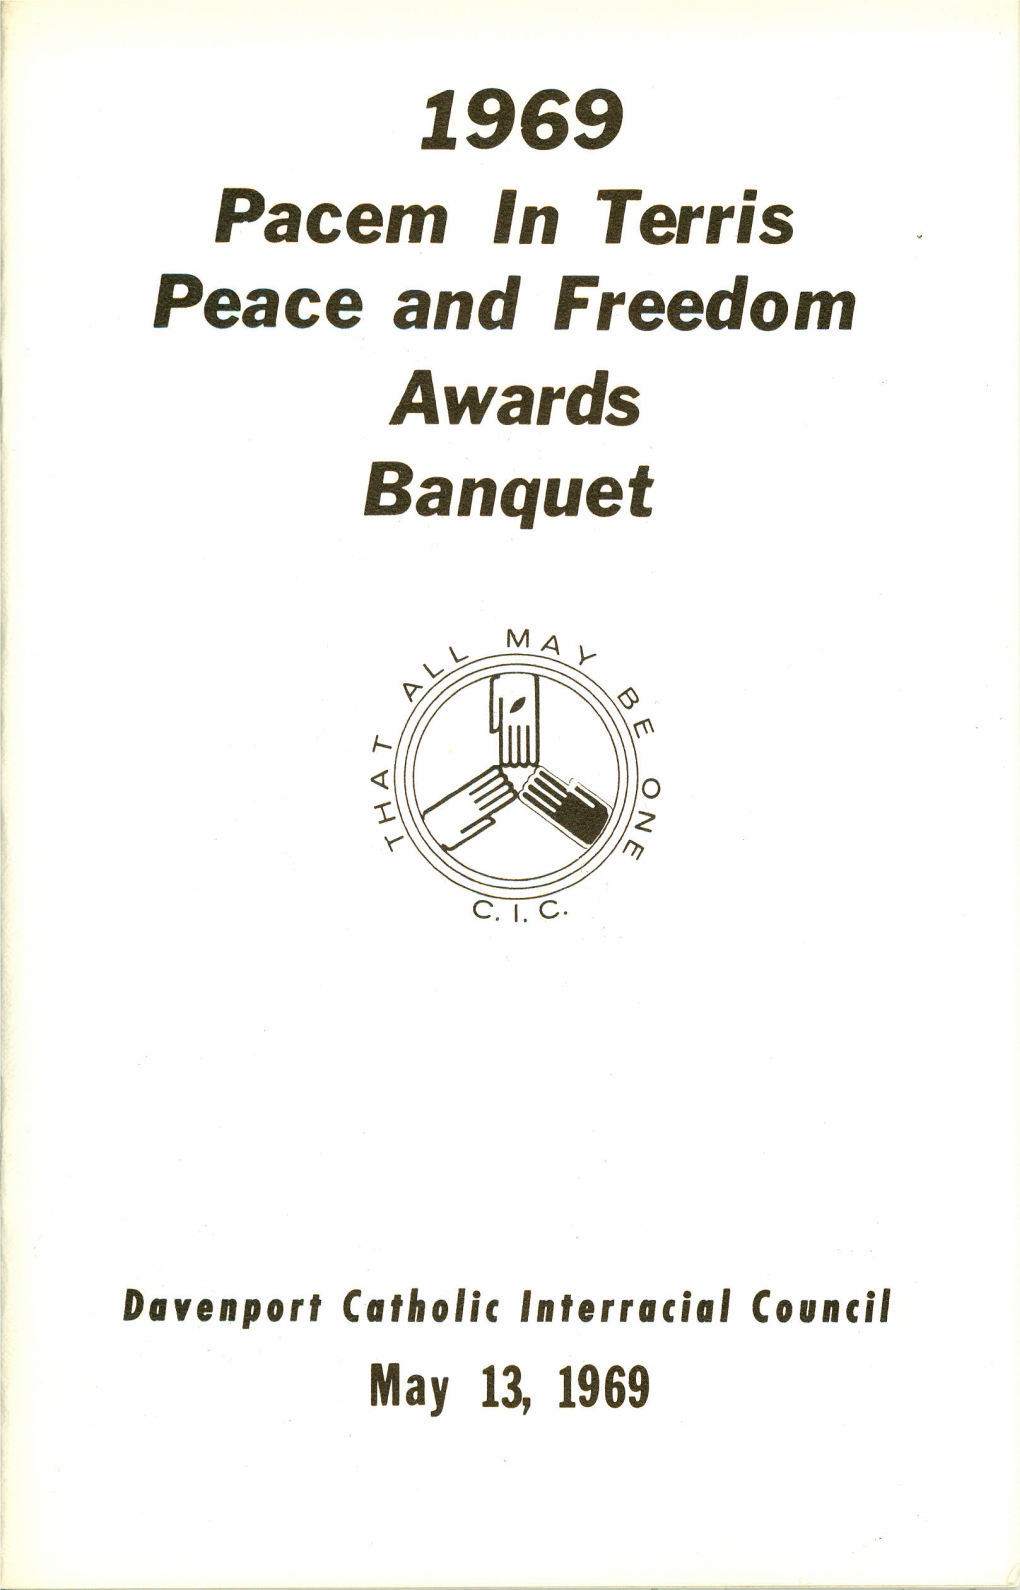 Pacem in Terris Peace and Freedom Awards Banquet